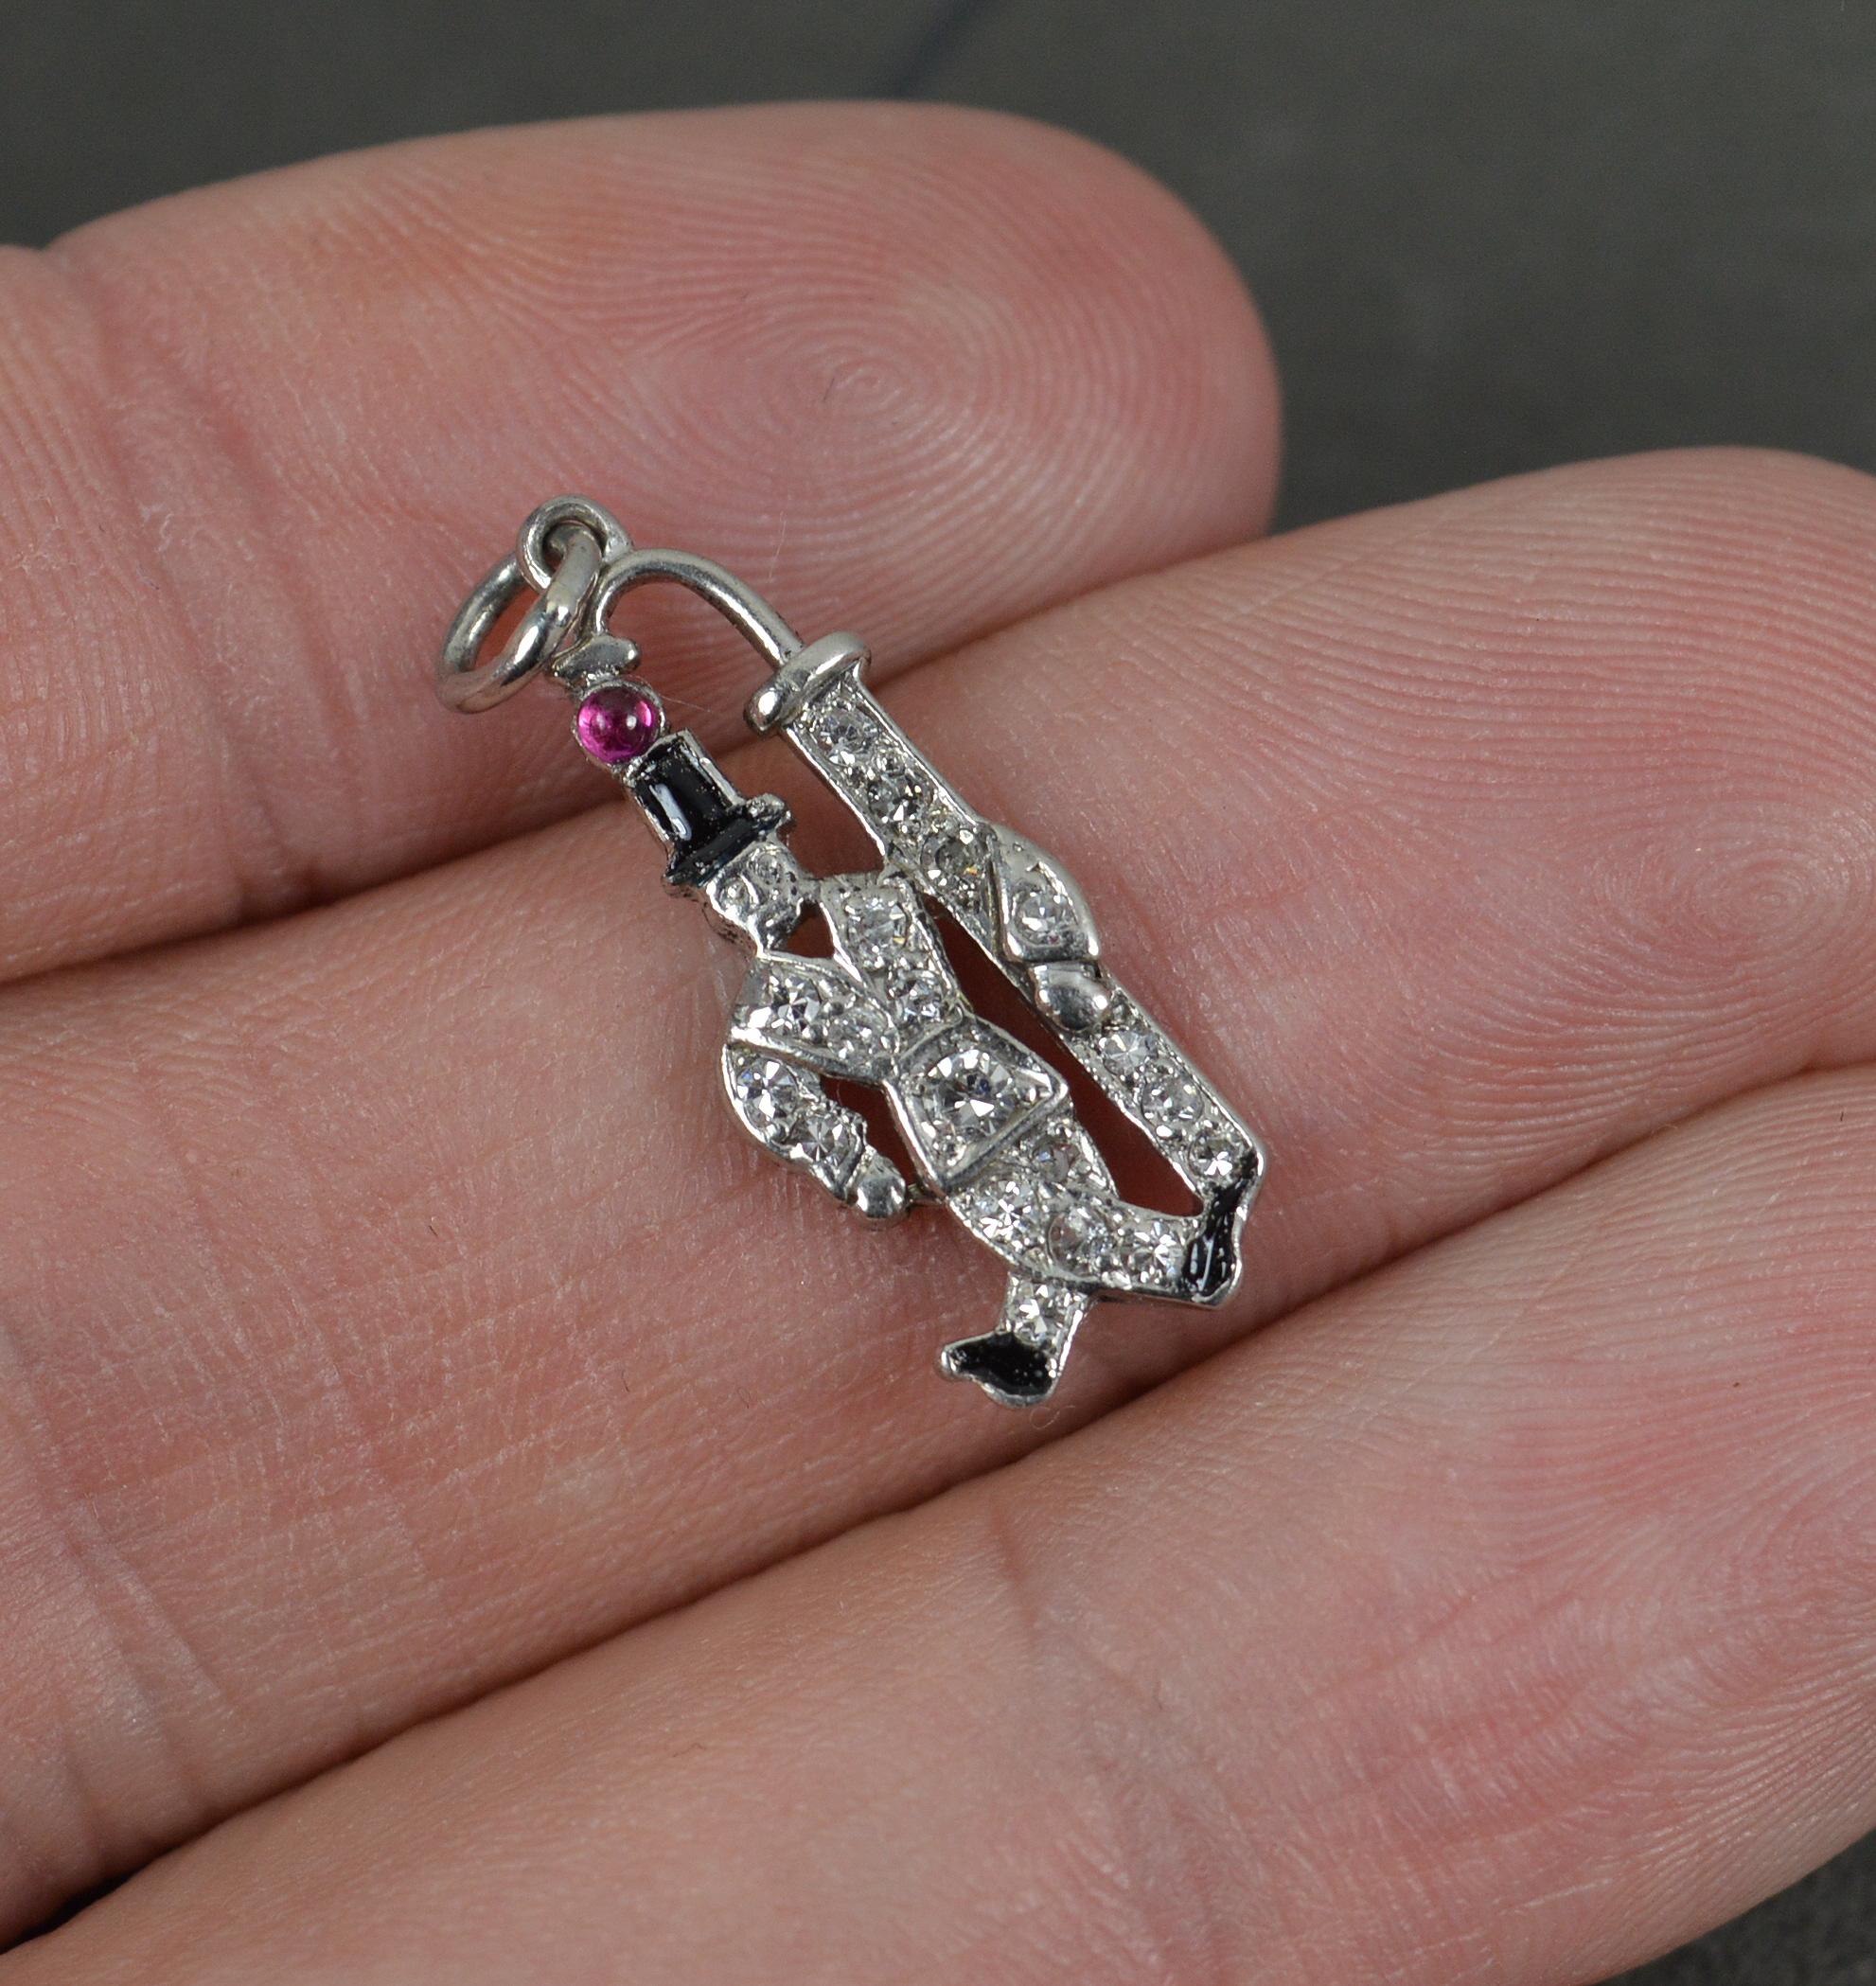 A fantastic Art Deco period pendant / charm. Circa 1920/30.
Solid platinum example.
Designed as a male in top hat with a lamp or lantern to side.
Set with a ruby cabochon to top, black enamel below and encrusted with many natural